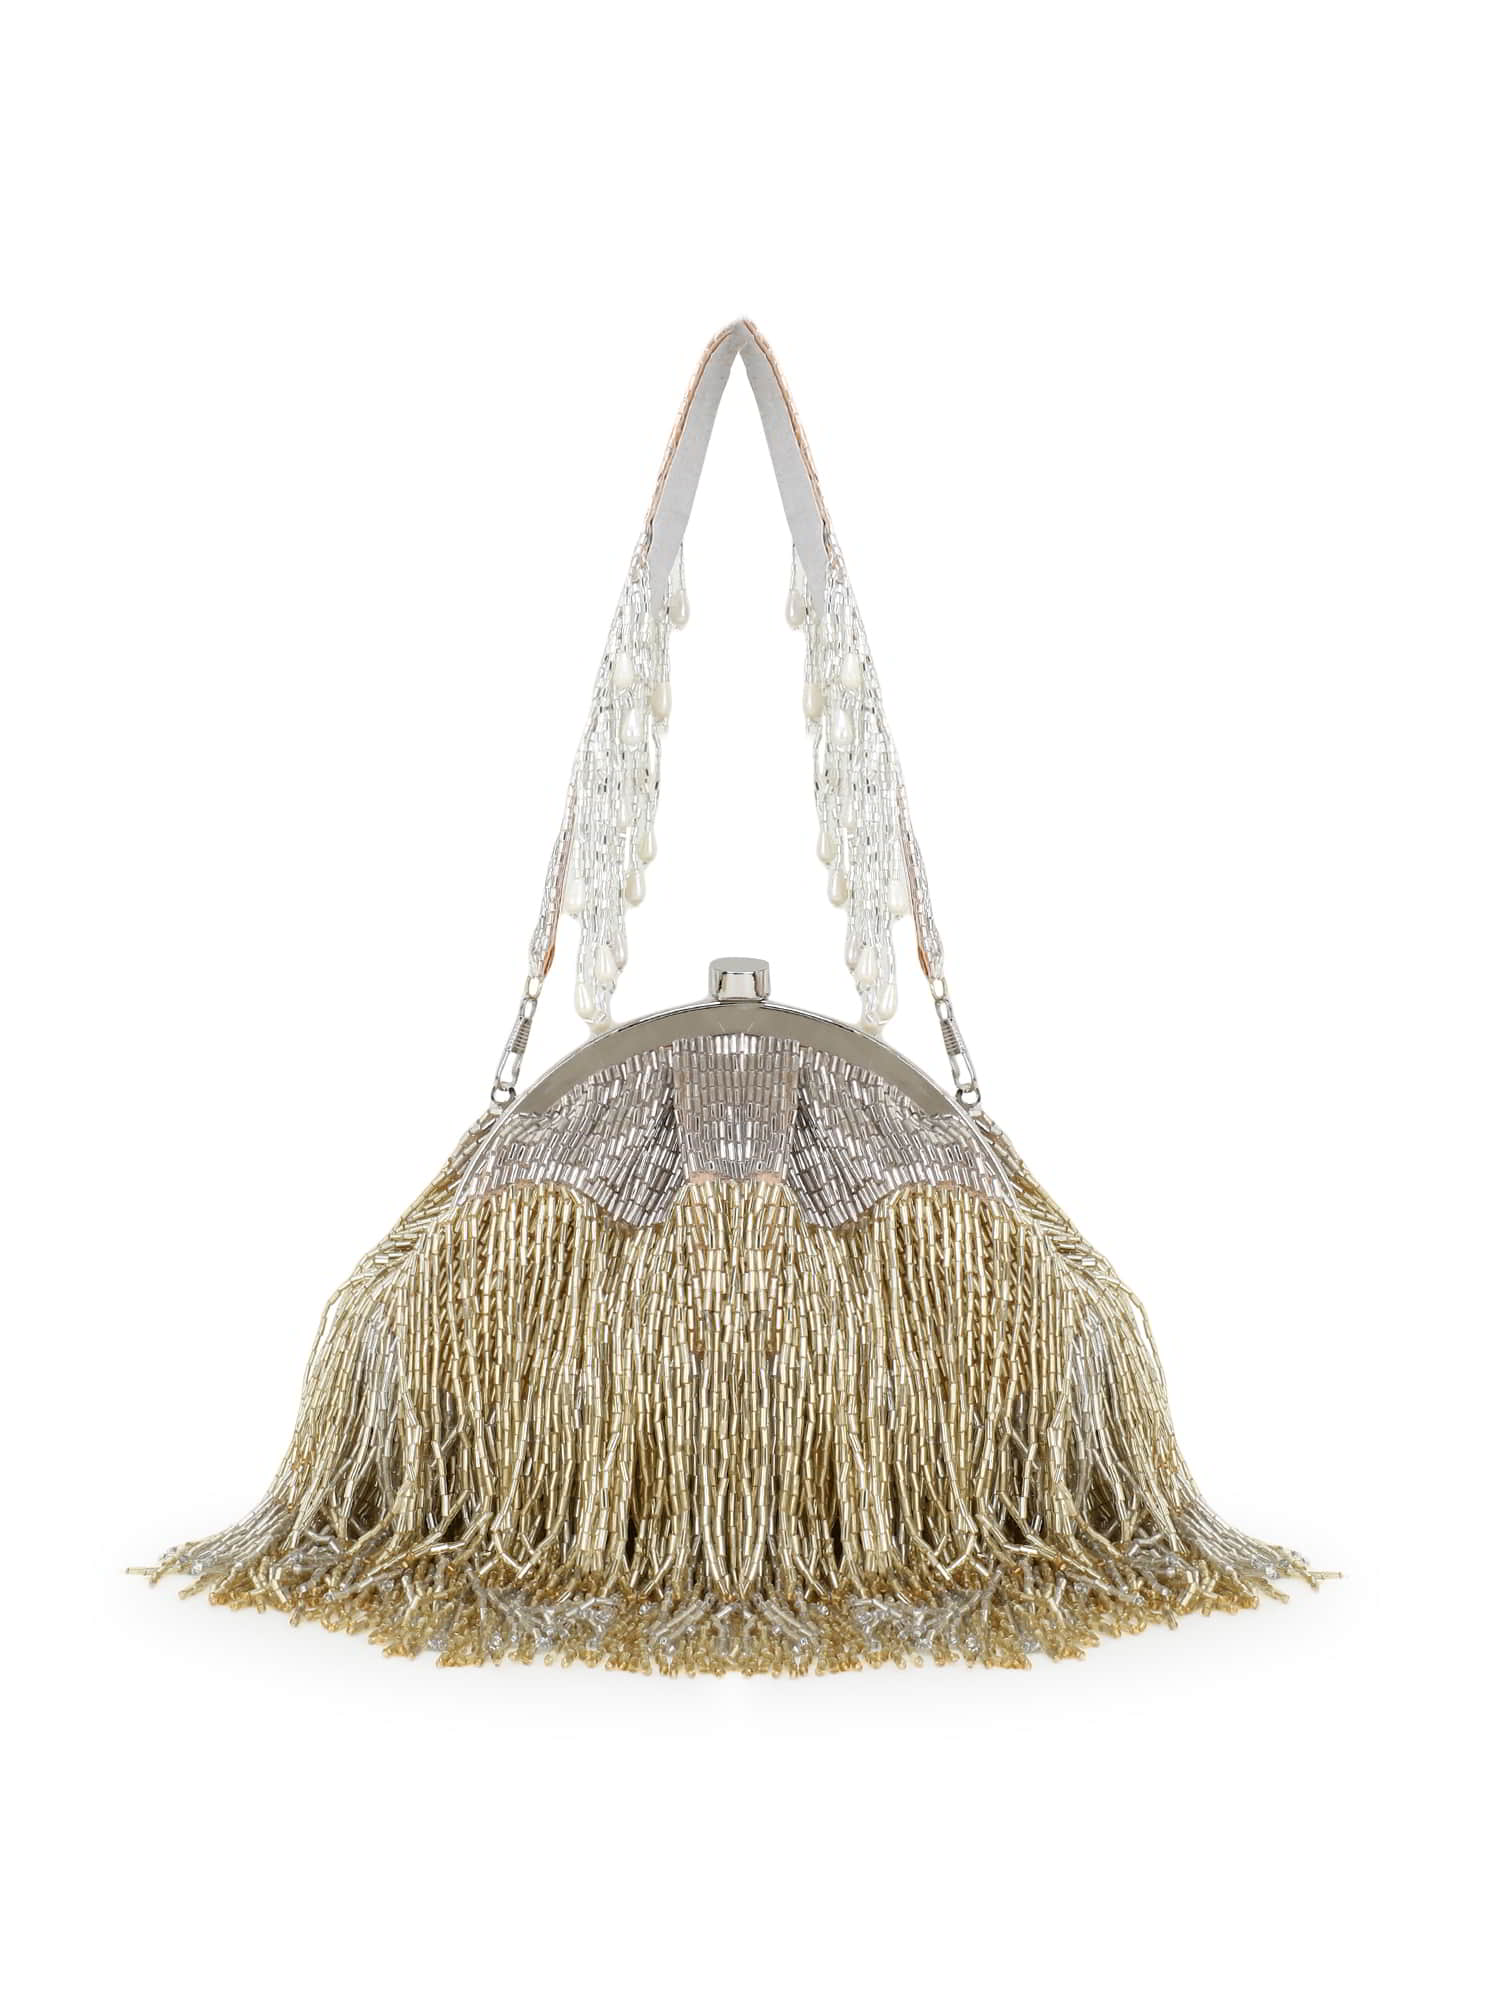 Floral Mesh Clutch Purse Evening Bag w/Silver Trim and Hideaway Chain (Gold  or Black/Grey) - Fringe, Flowers and Frills